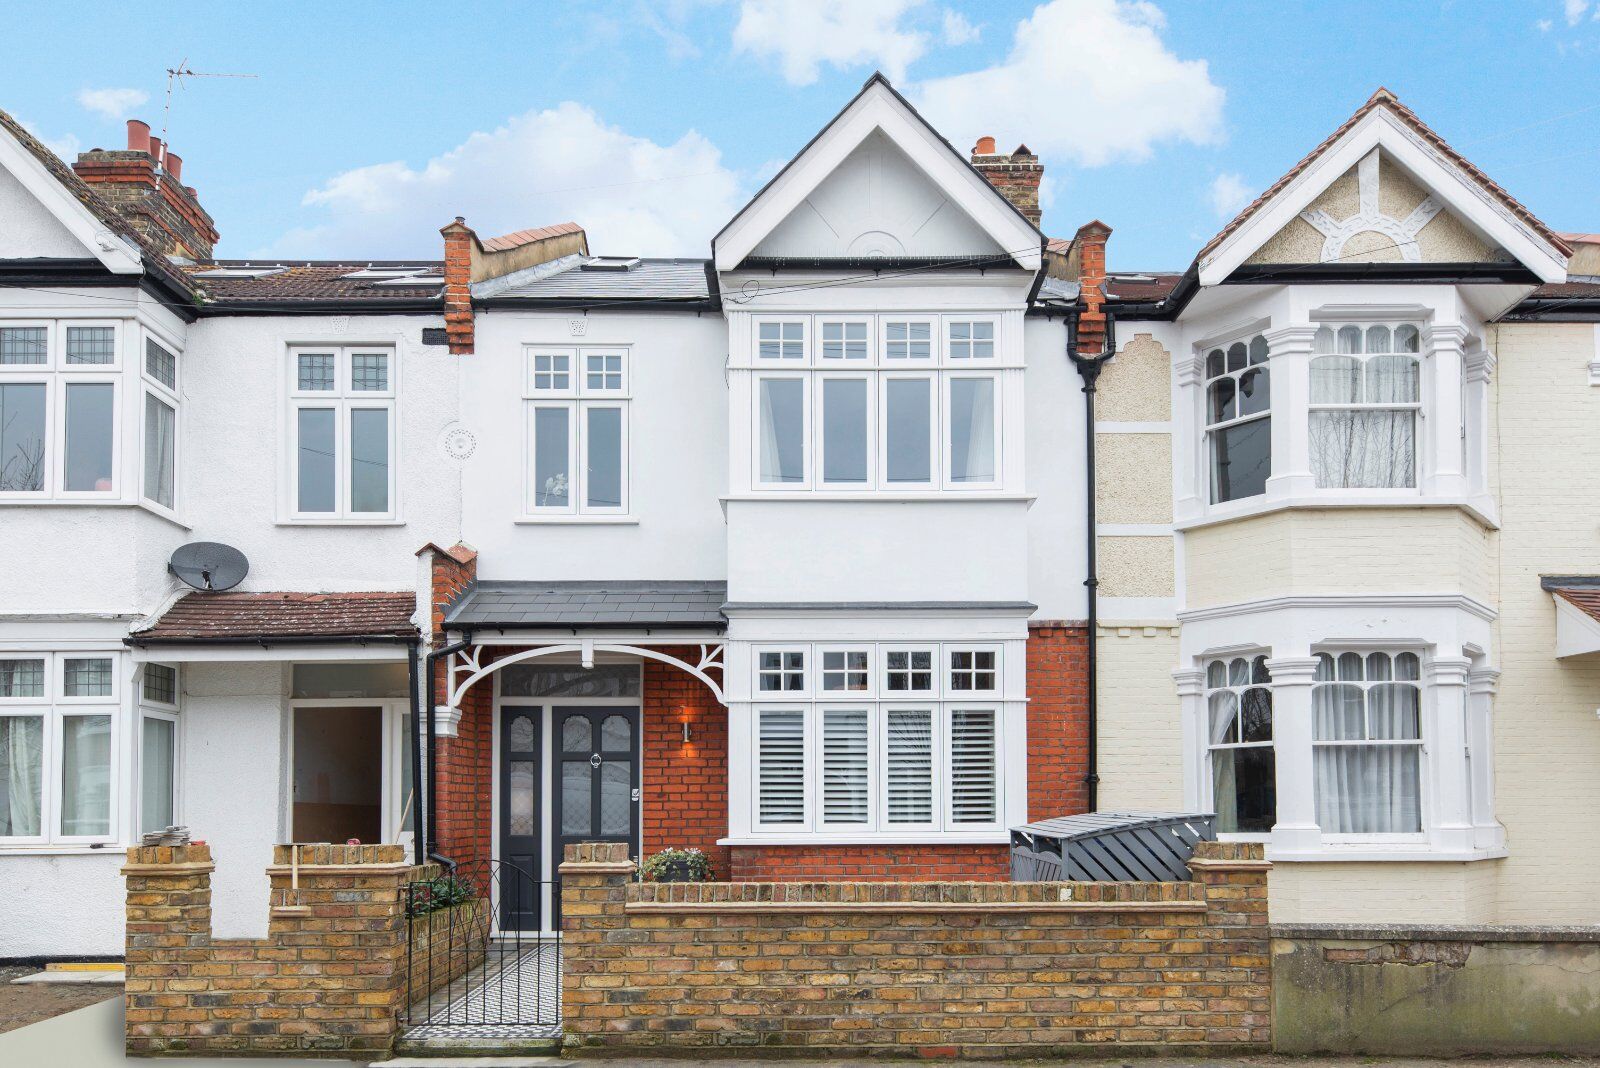 4 bedroom mid terraced house for sale Melbourne Road, Wimbledon, SW19, SW19, main image